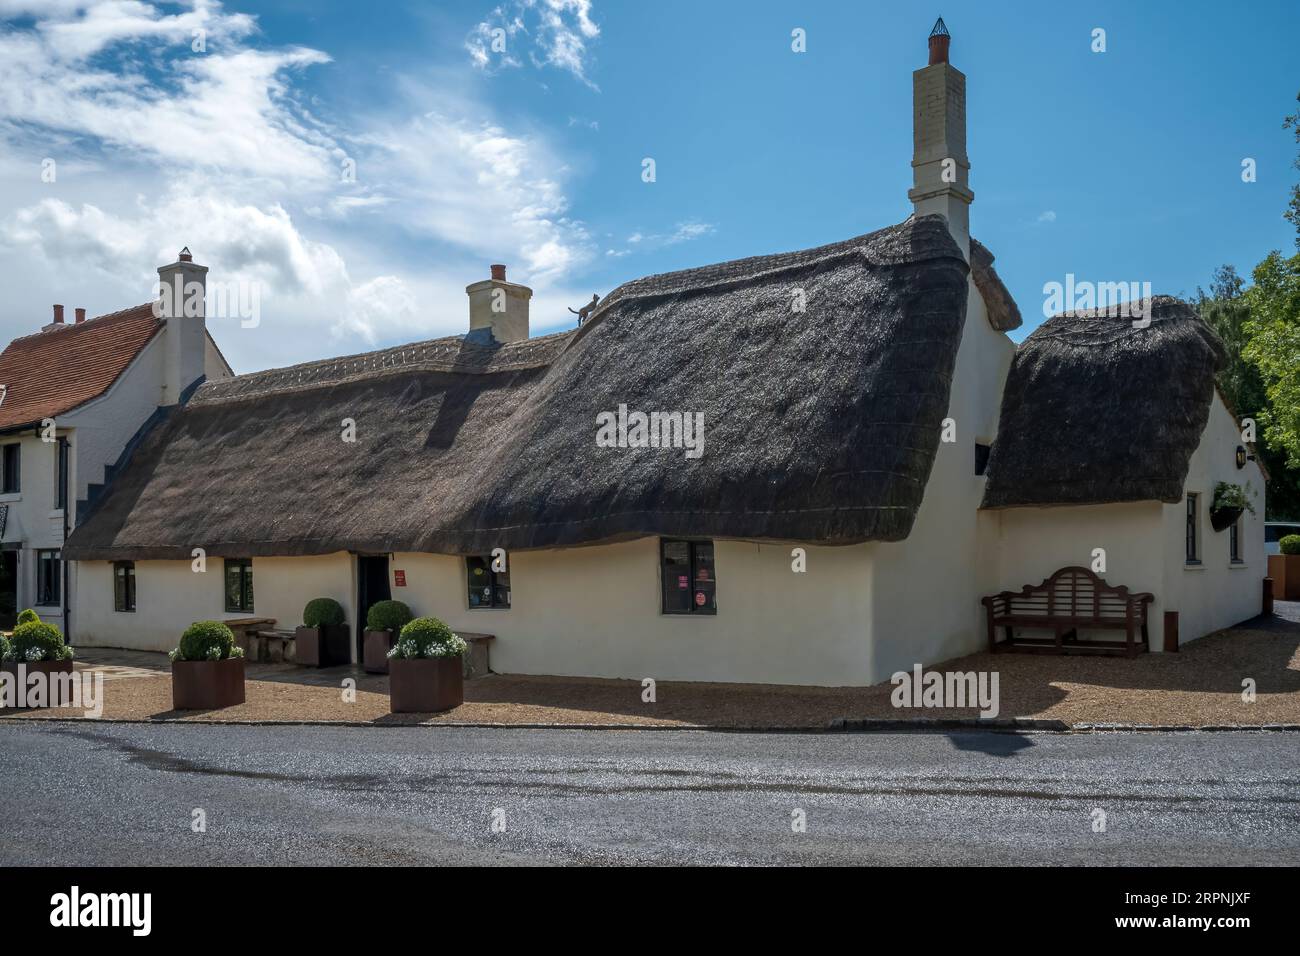 The Star Inn at Harome after it's rebuild following a fire. Stock Photo